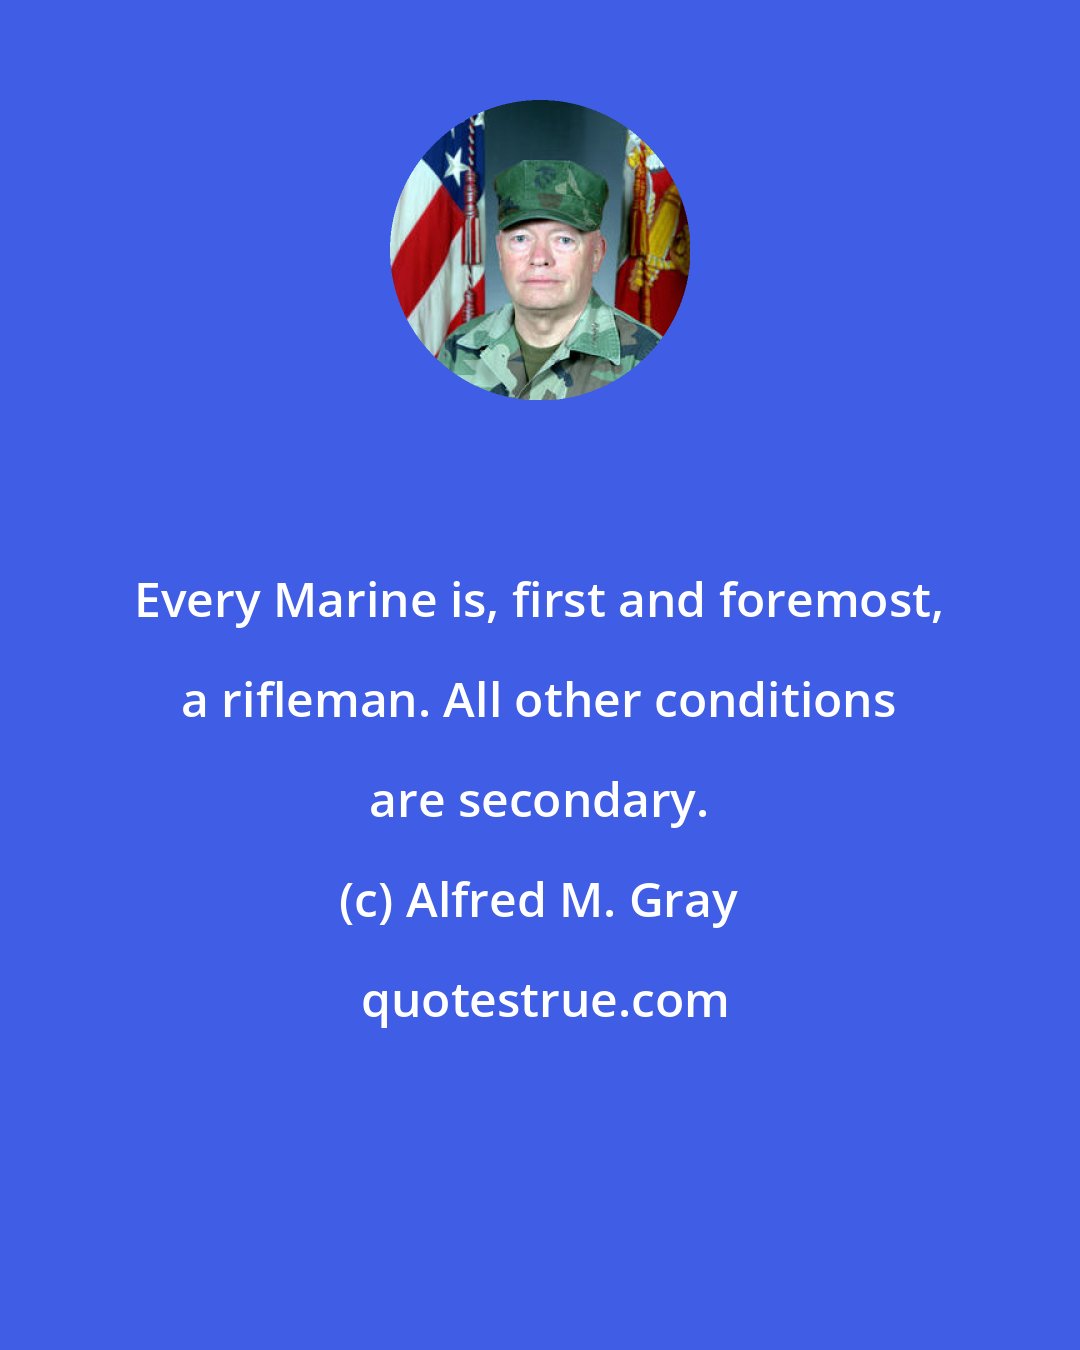 Alfred M. Gray: Every Marine is, first and foremost, a rifleman. All other conditions are secondary.